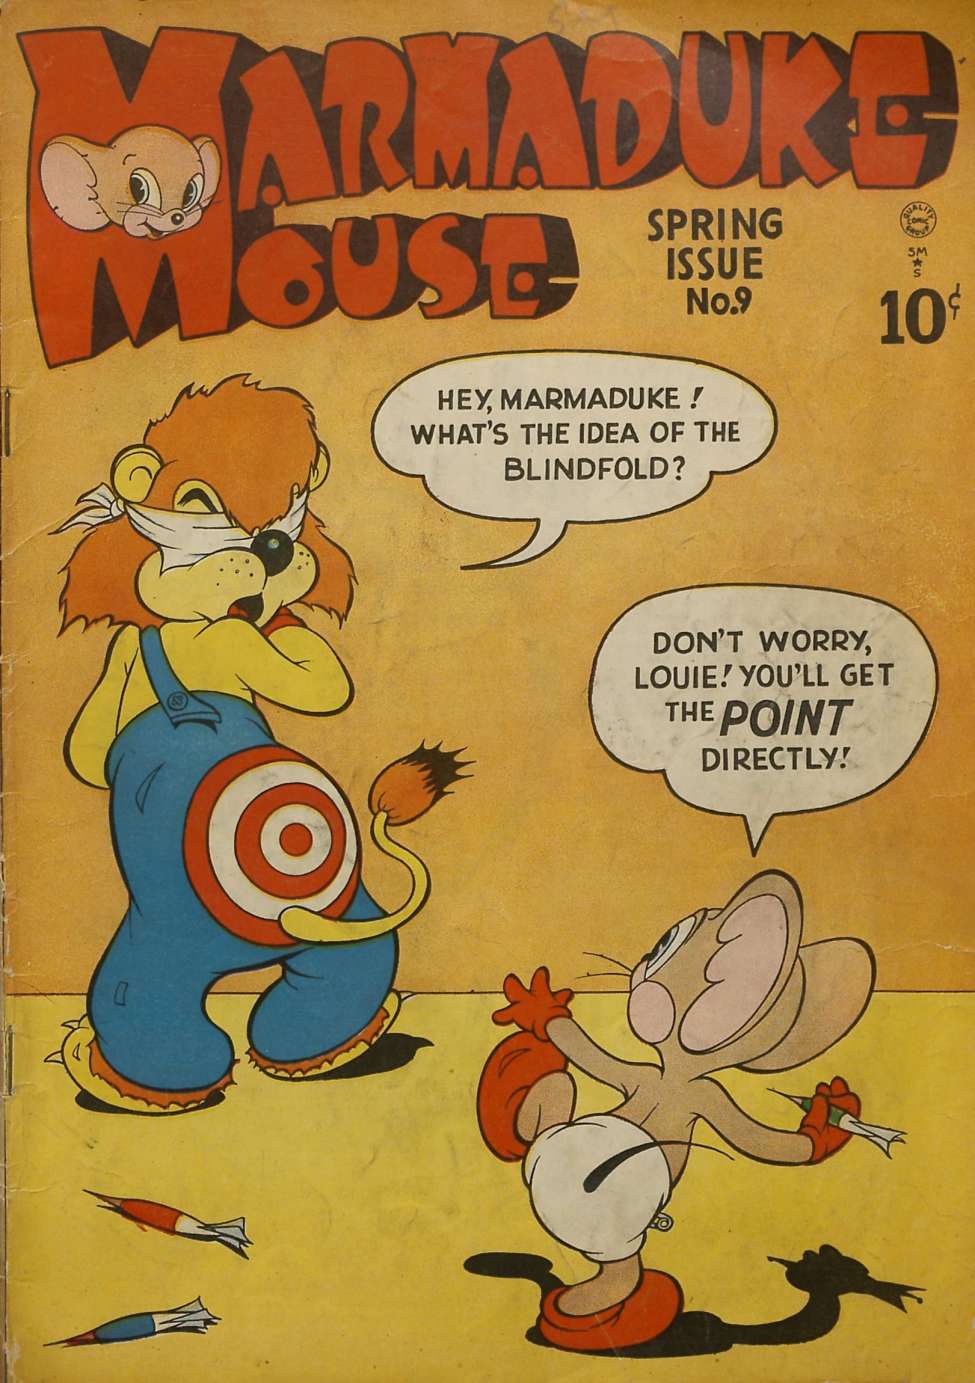 Book Cover For Marmaduke Mouse 9